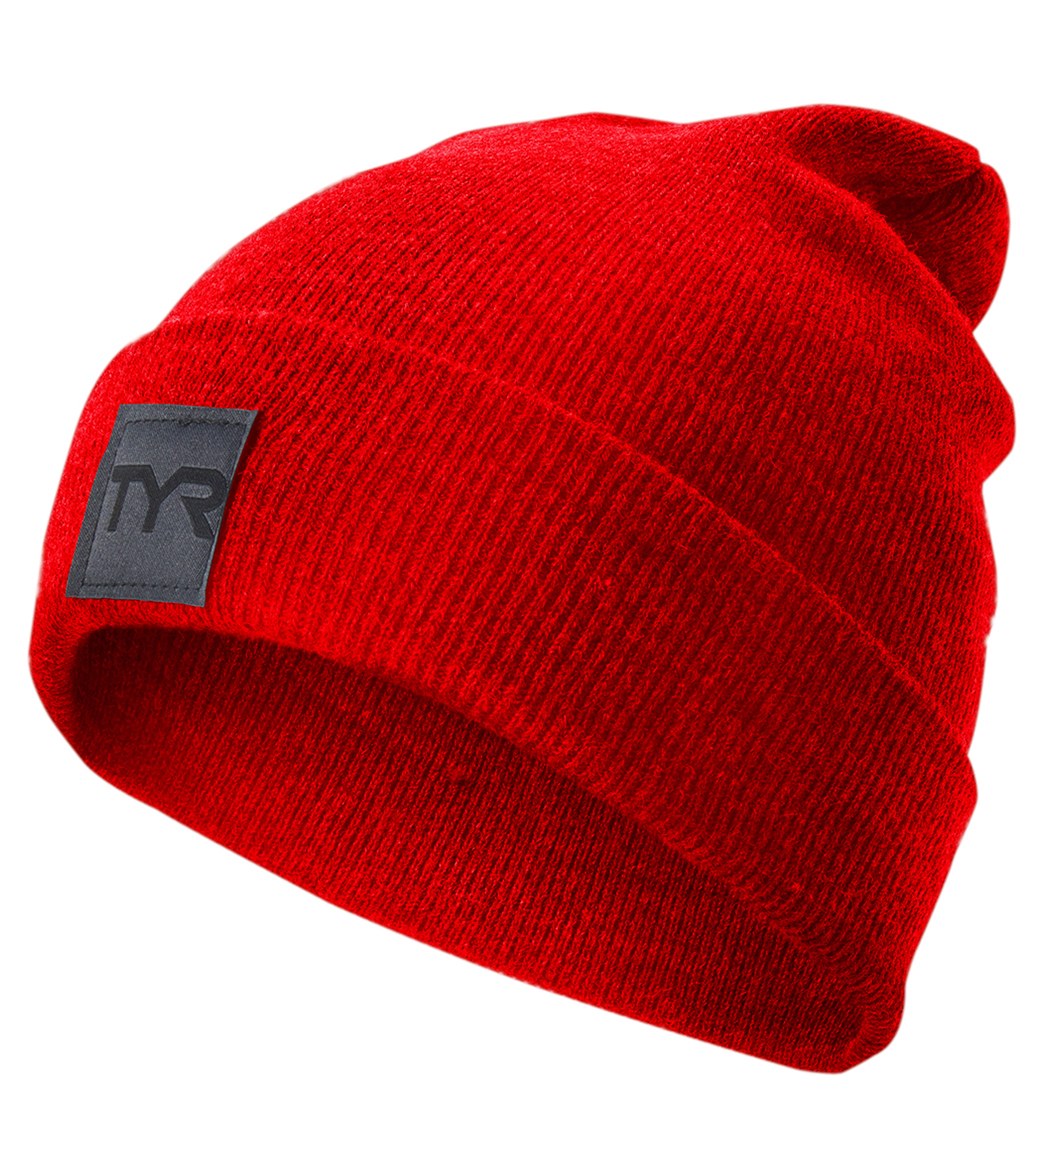 TYR Cuffed Knit Beanie at SwimOutlet.com